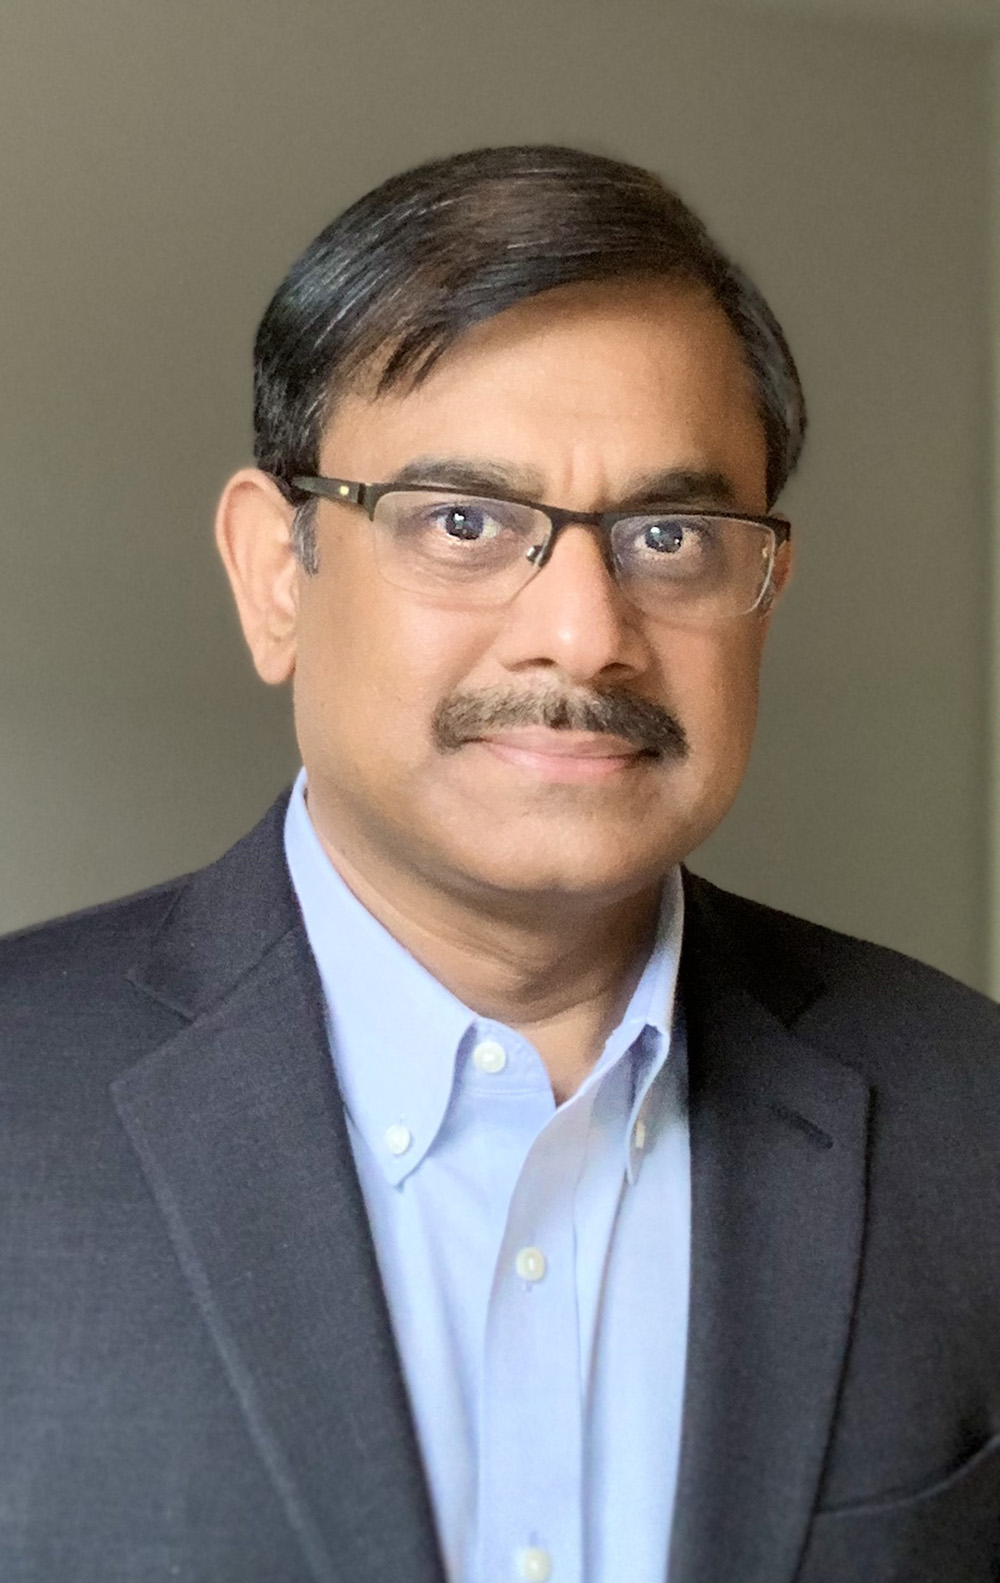 Gopinath “Gopi” Munisamy, a UGA professor of agricultural and applied economics, was recently named Distinguished Professor of Agricultural Marketing in the College of Agricultural and Environmental Sciences.